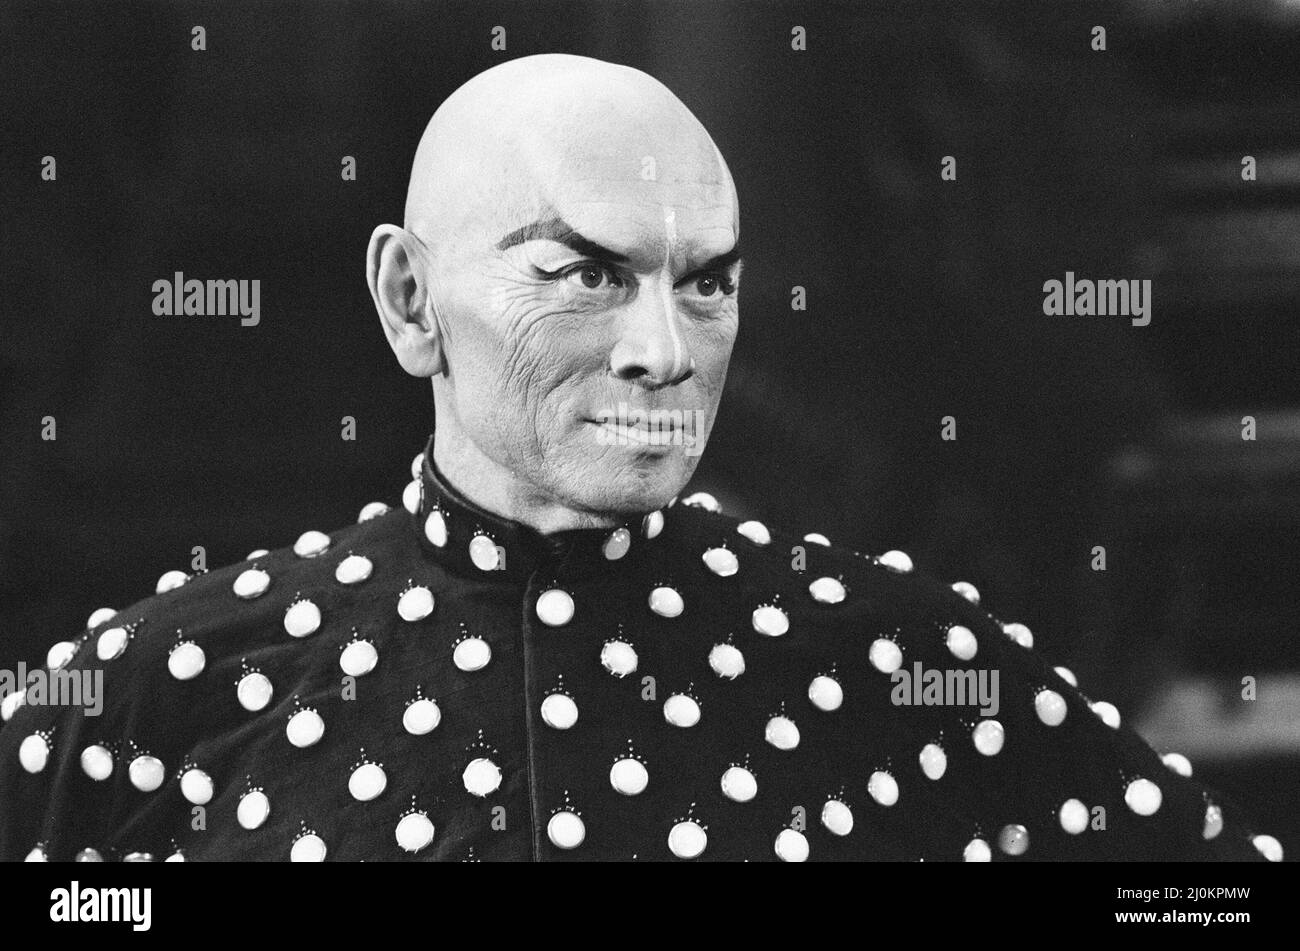 Yul Brynner, Actor at the London Palladium Theatre, 22nd August 1980. The King of Siam is in triumphant form these days, Actor Yul Brynner has clocked up his 3000th performance as the ruler in the hit musical, The King and I, but the imposing star with a reputationfor being hard to approach is staying tight-lipped about hit achievement. At the London Palladium, where the show has smashed box-office records, he merely said: 'It's been a long time'. Brynner bows out of the part next month. And no doubt he'll receive a Royal send off. Stock Photo